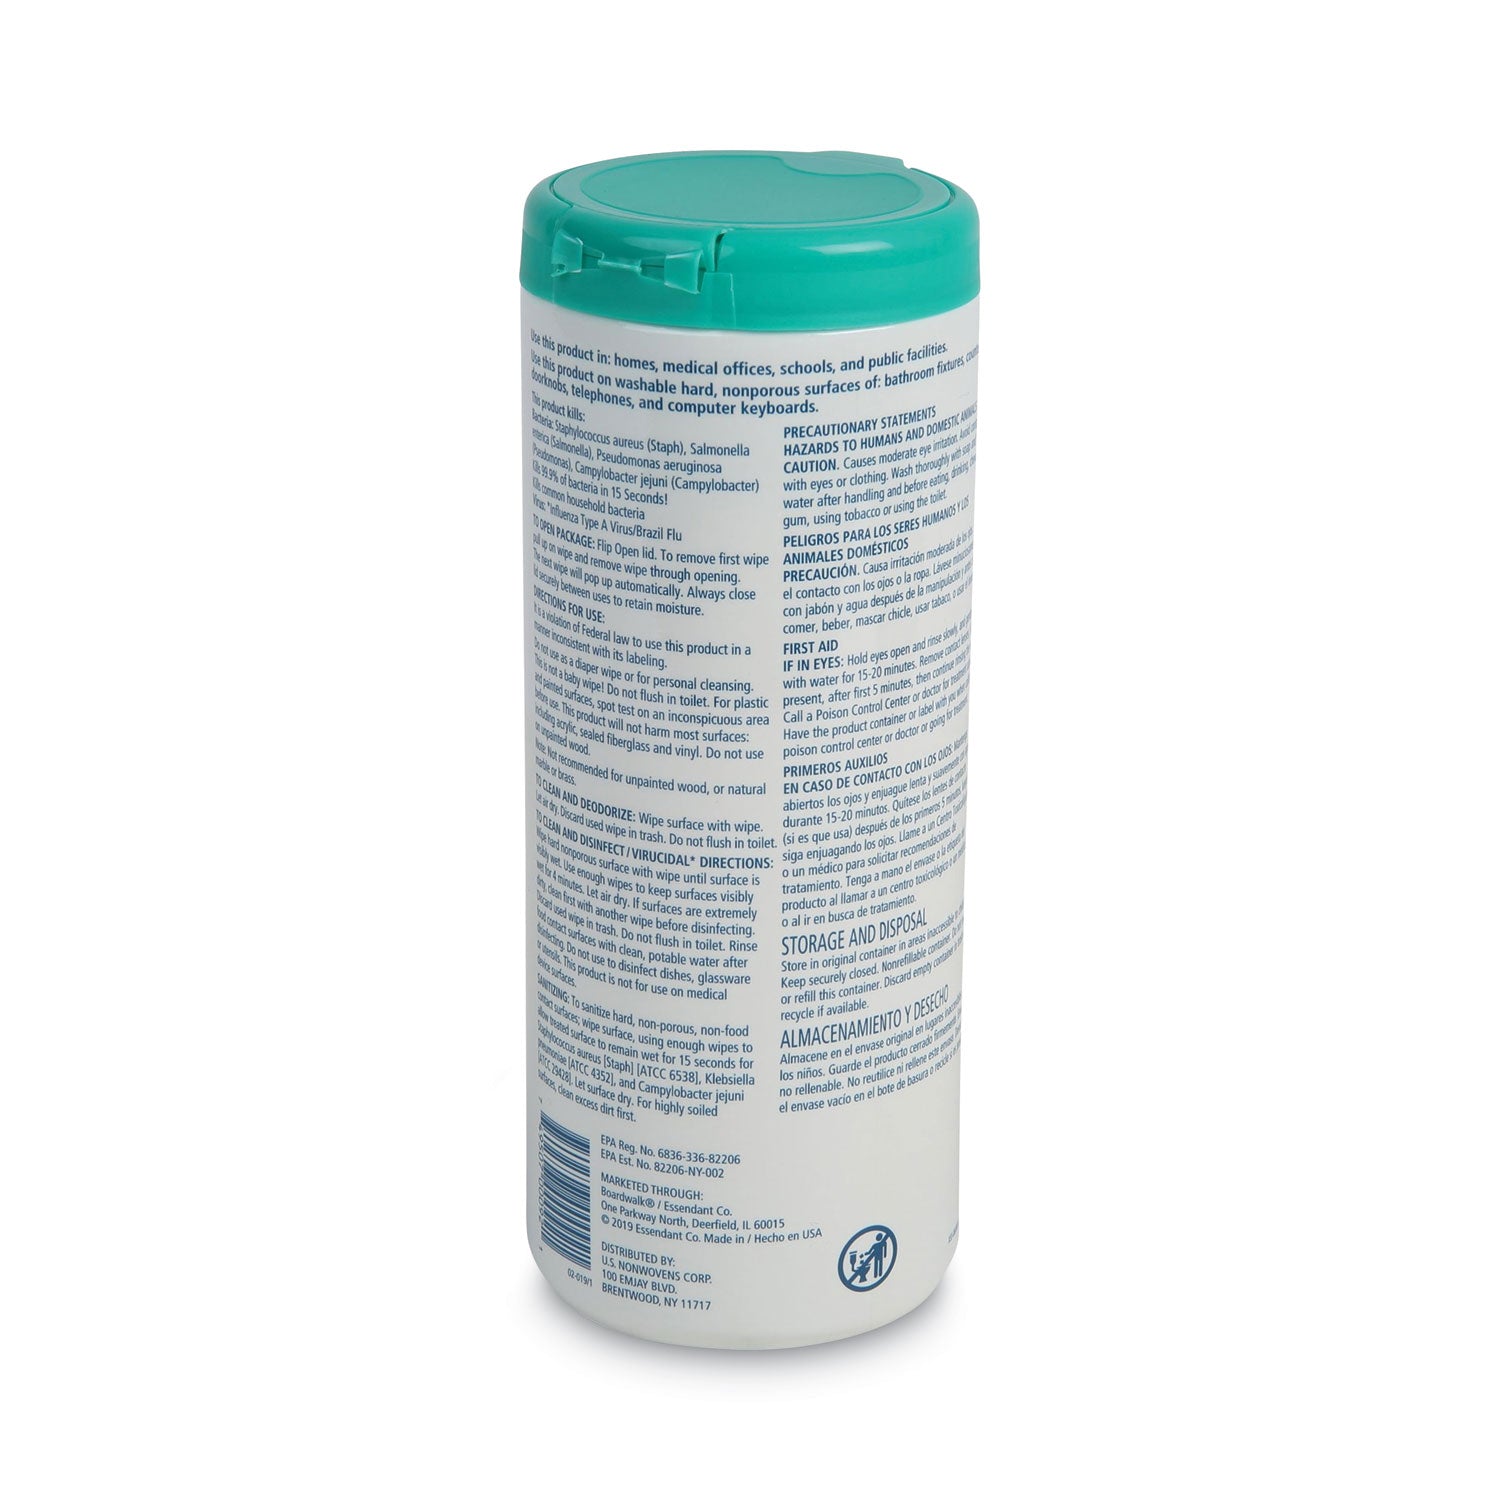 disinfecting-wipes-7-x-8-fresh-scent-35-canister-12-canisters-carton_bwk454w35 - 3